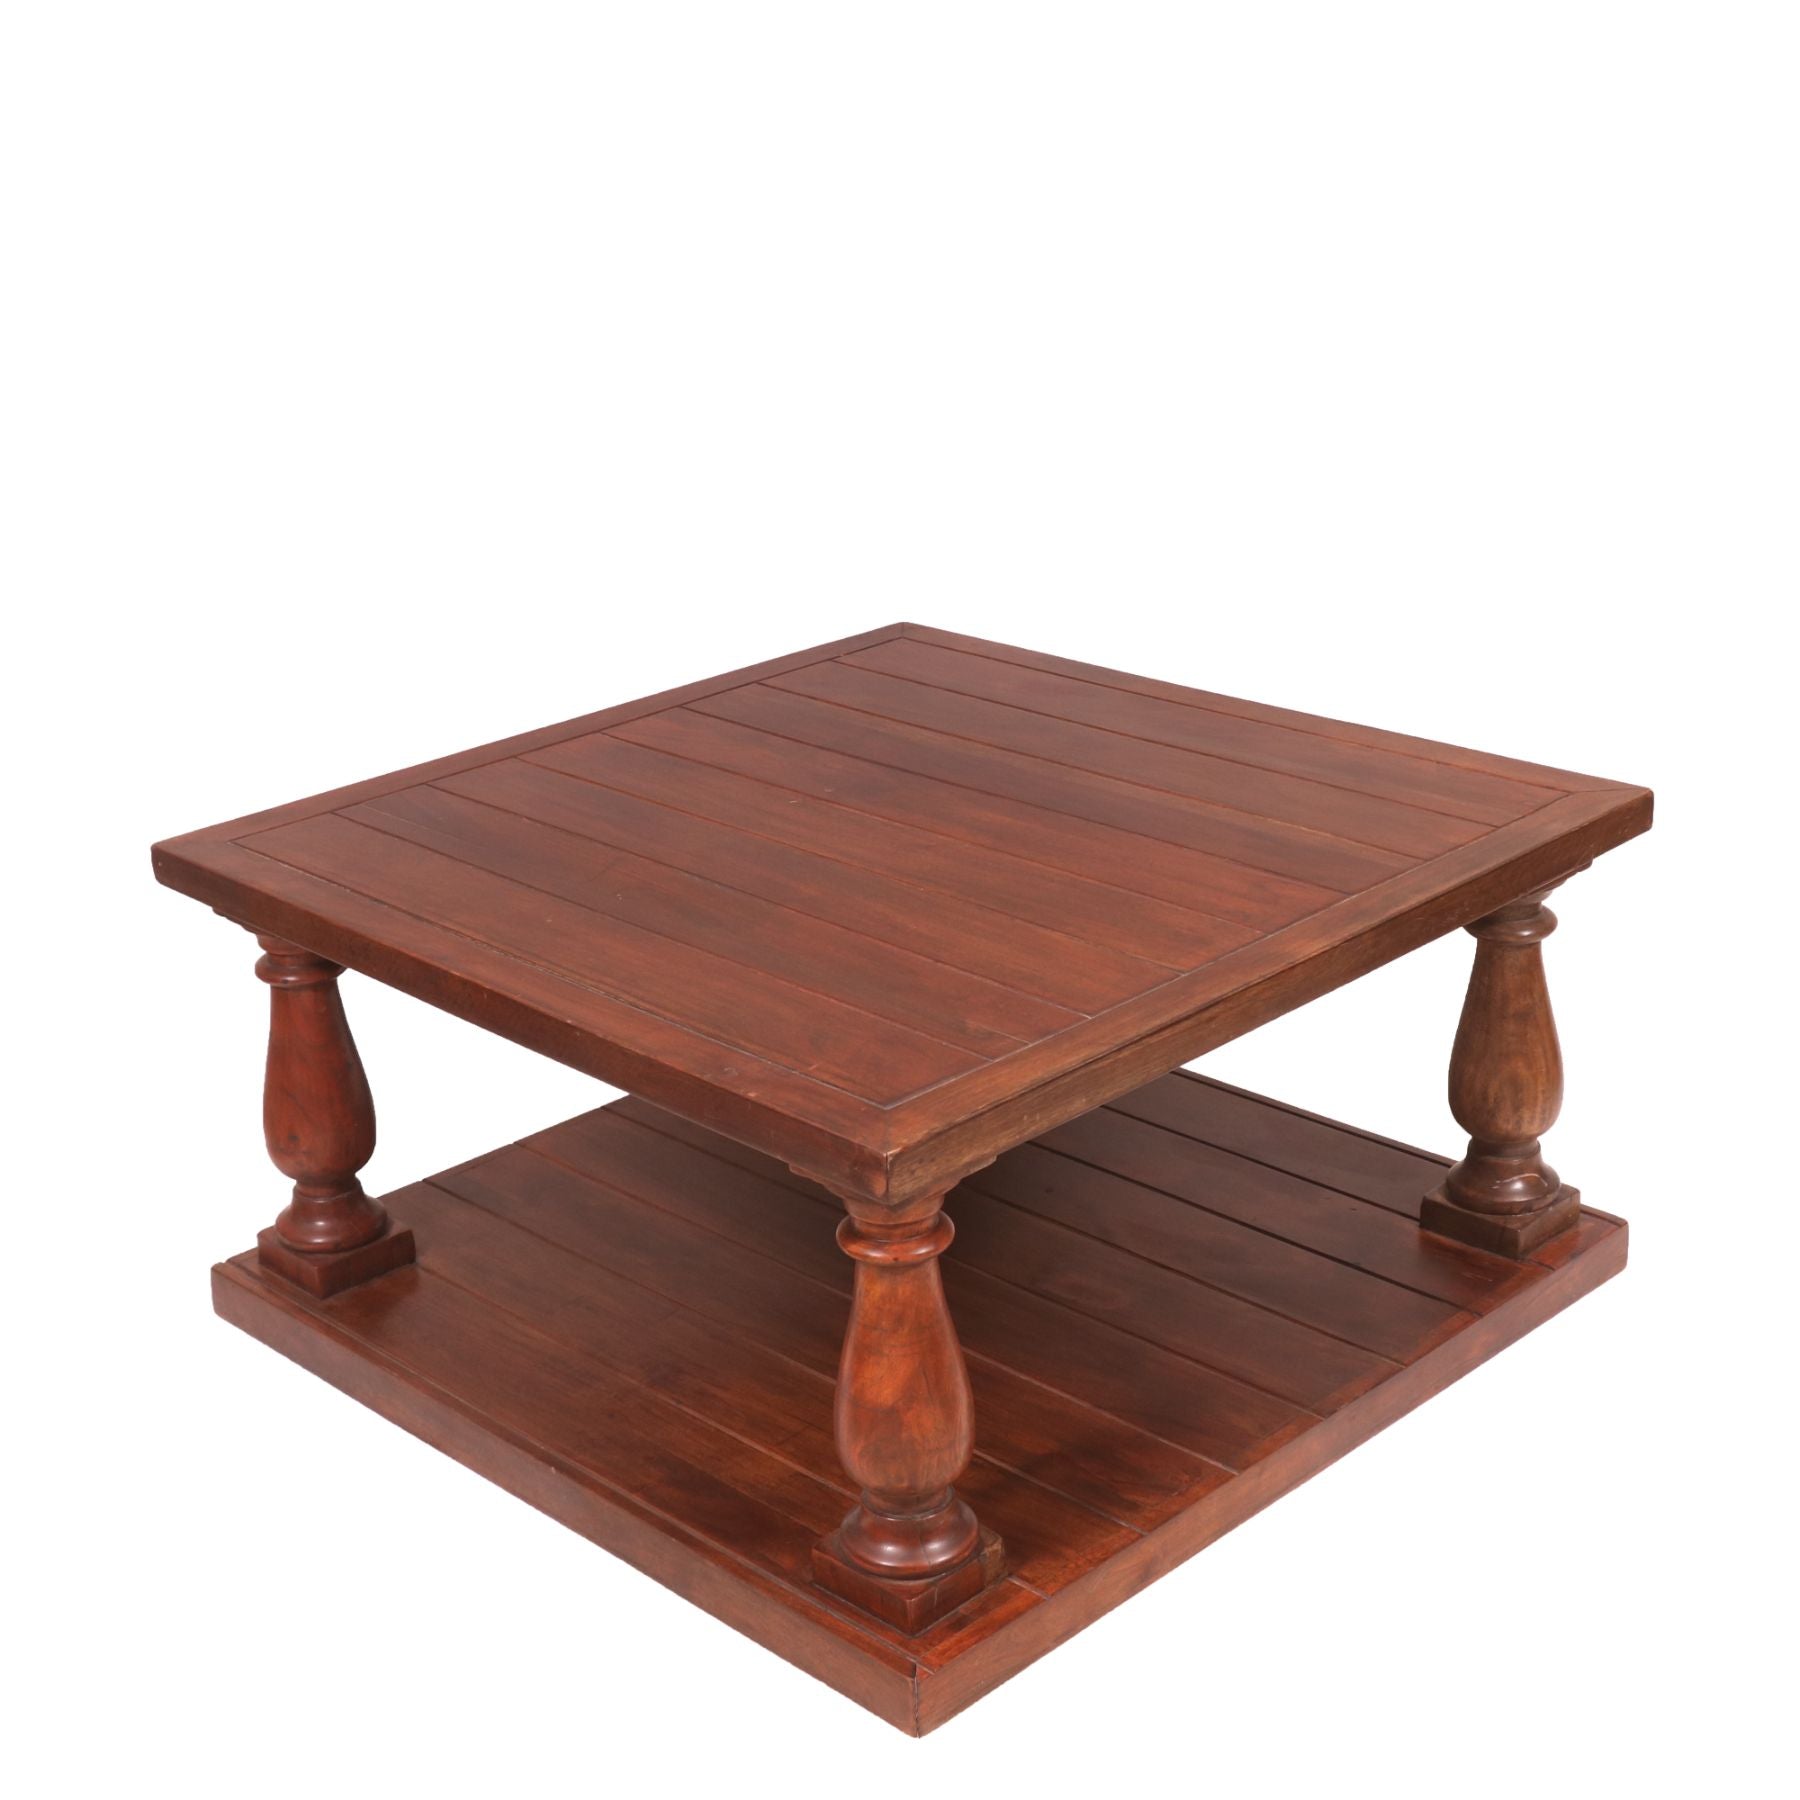 Solid wood Square Coffee Table Coffee Table